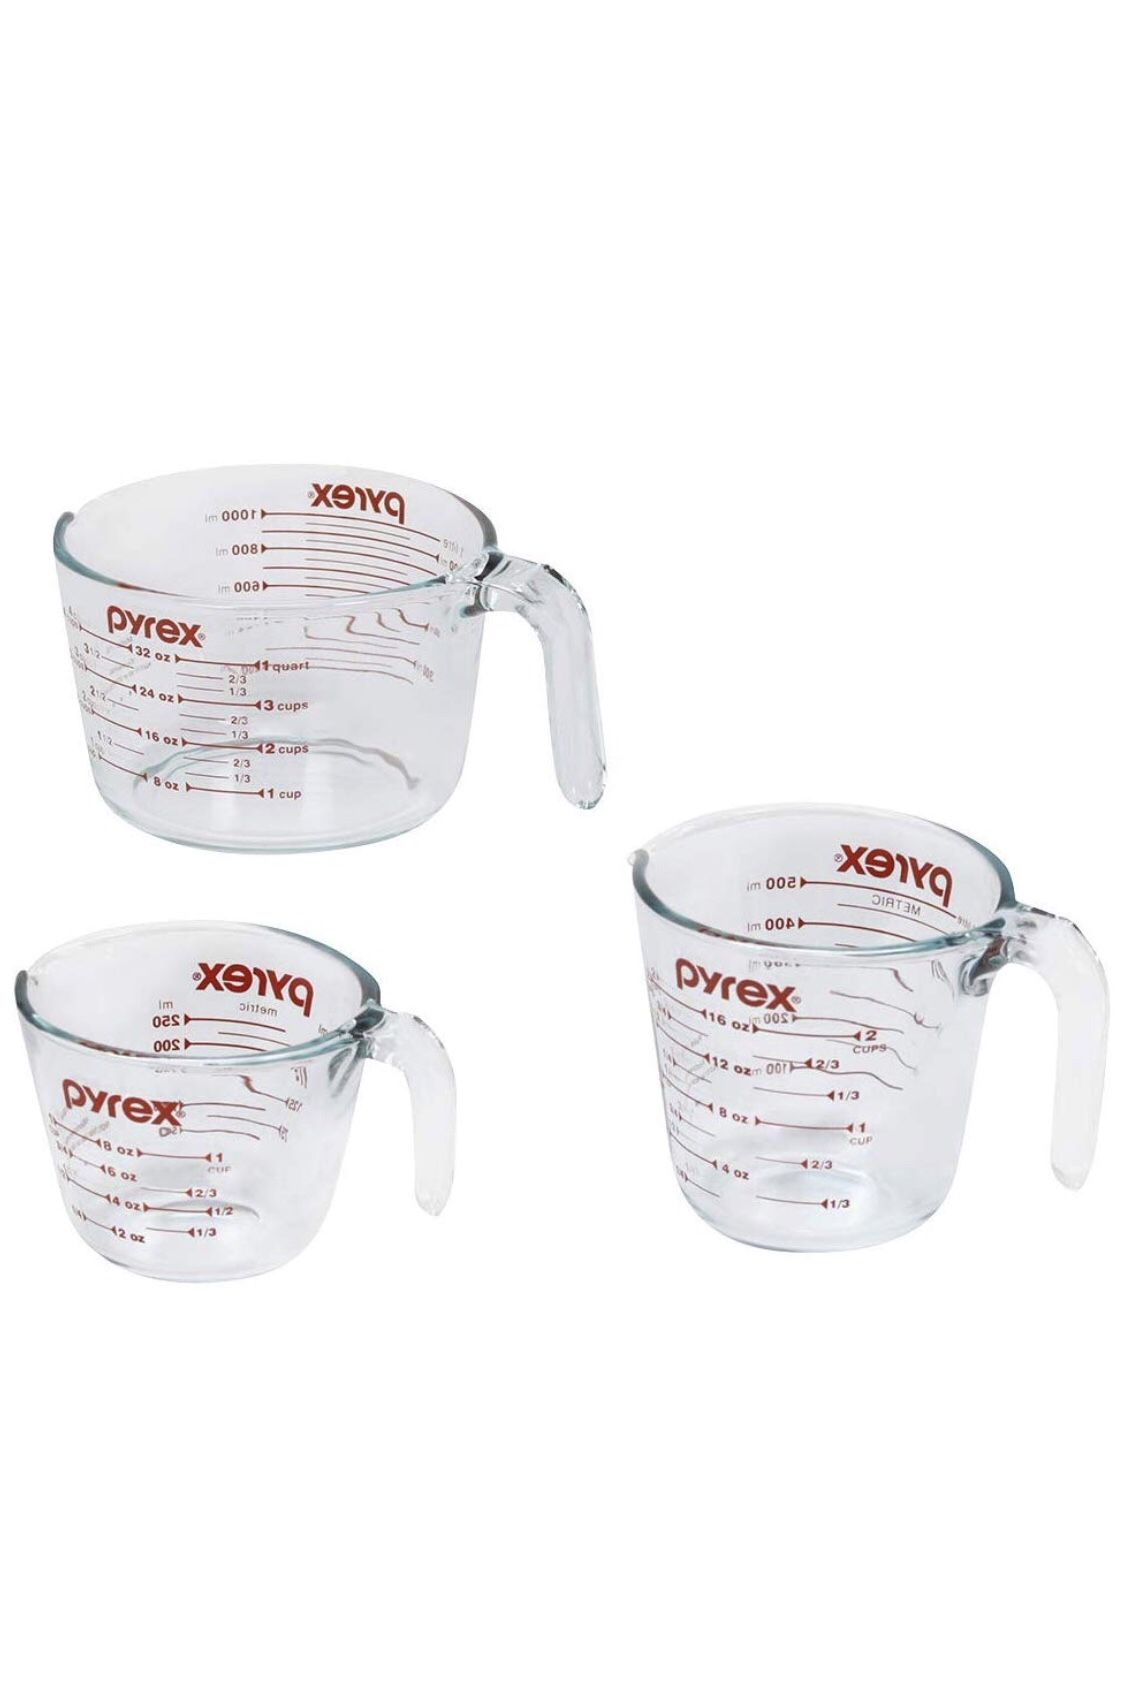 A SET OF 3 PYREX GLASS MEASURING CUPS!